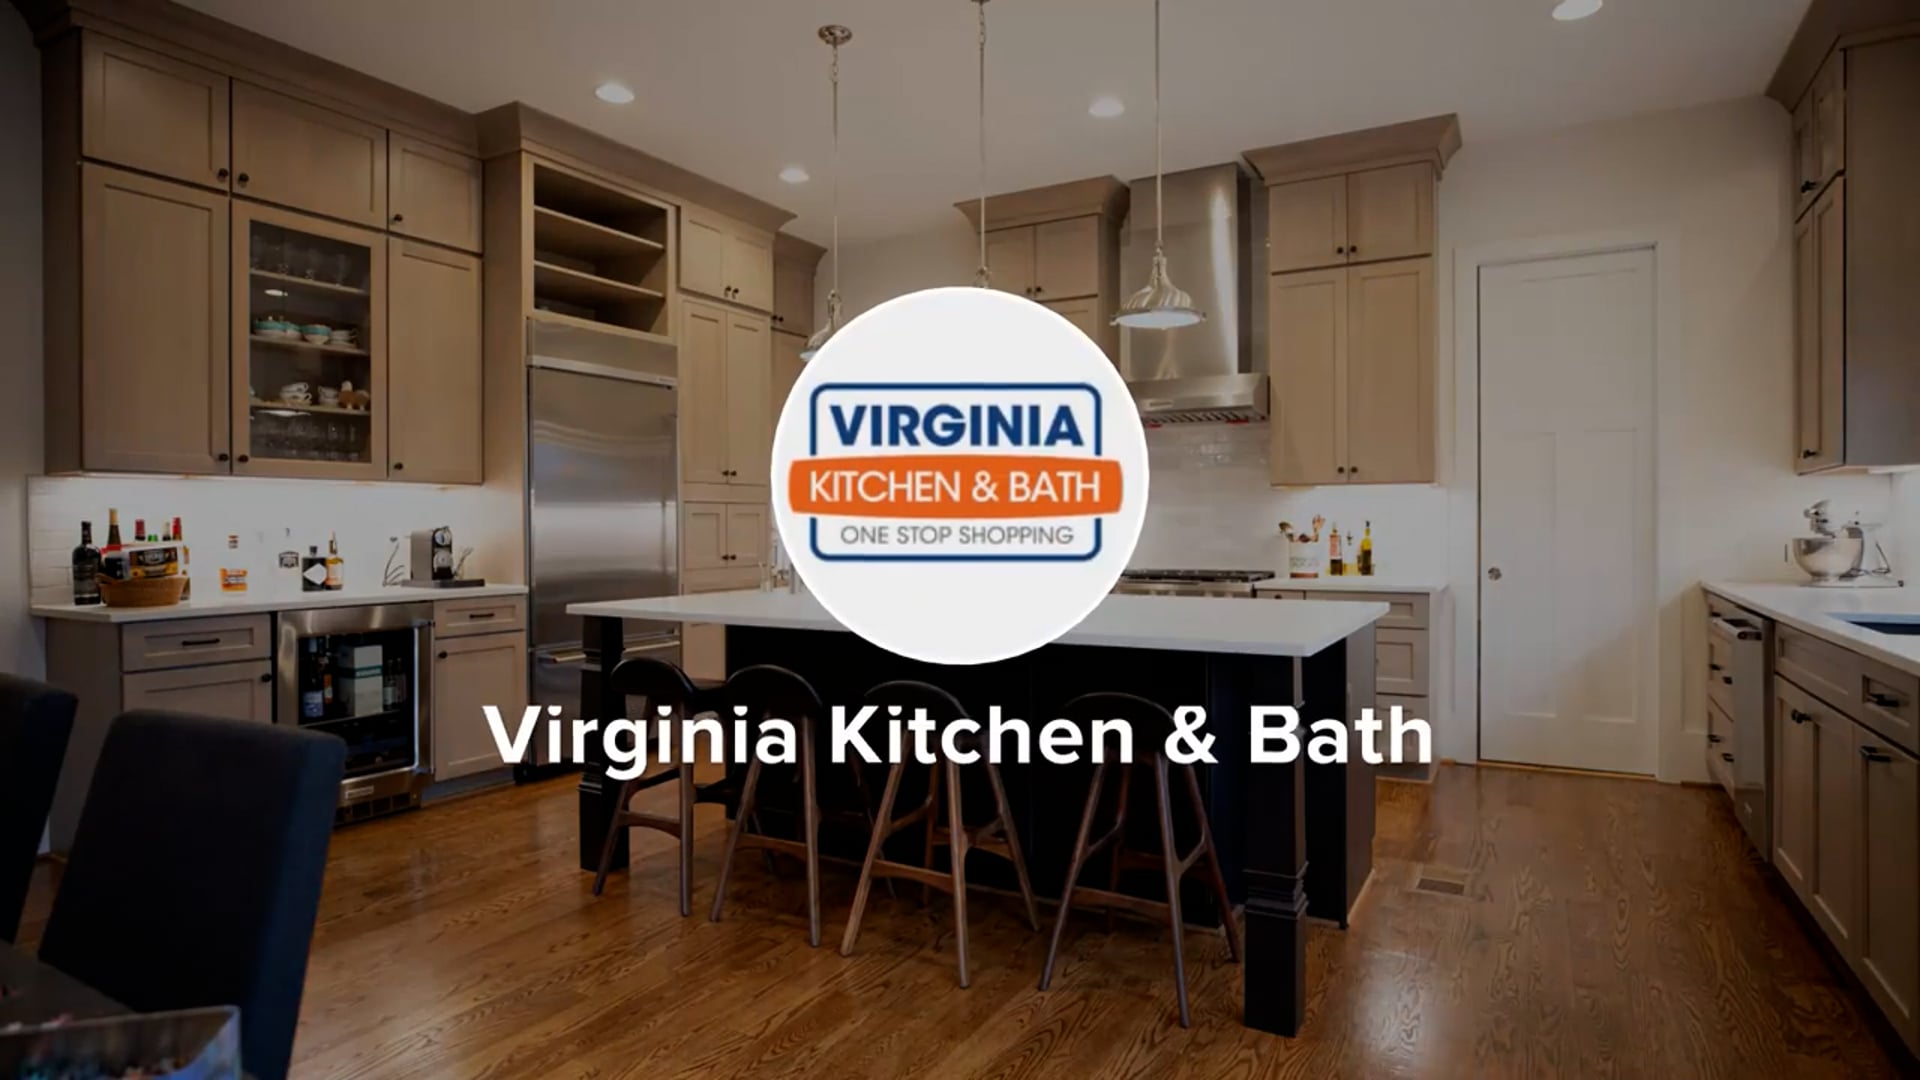 Top Kitchen and Bathroom Remodelers in Louth